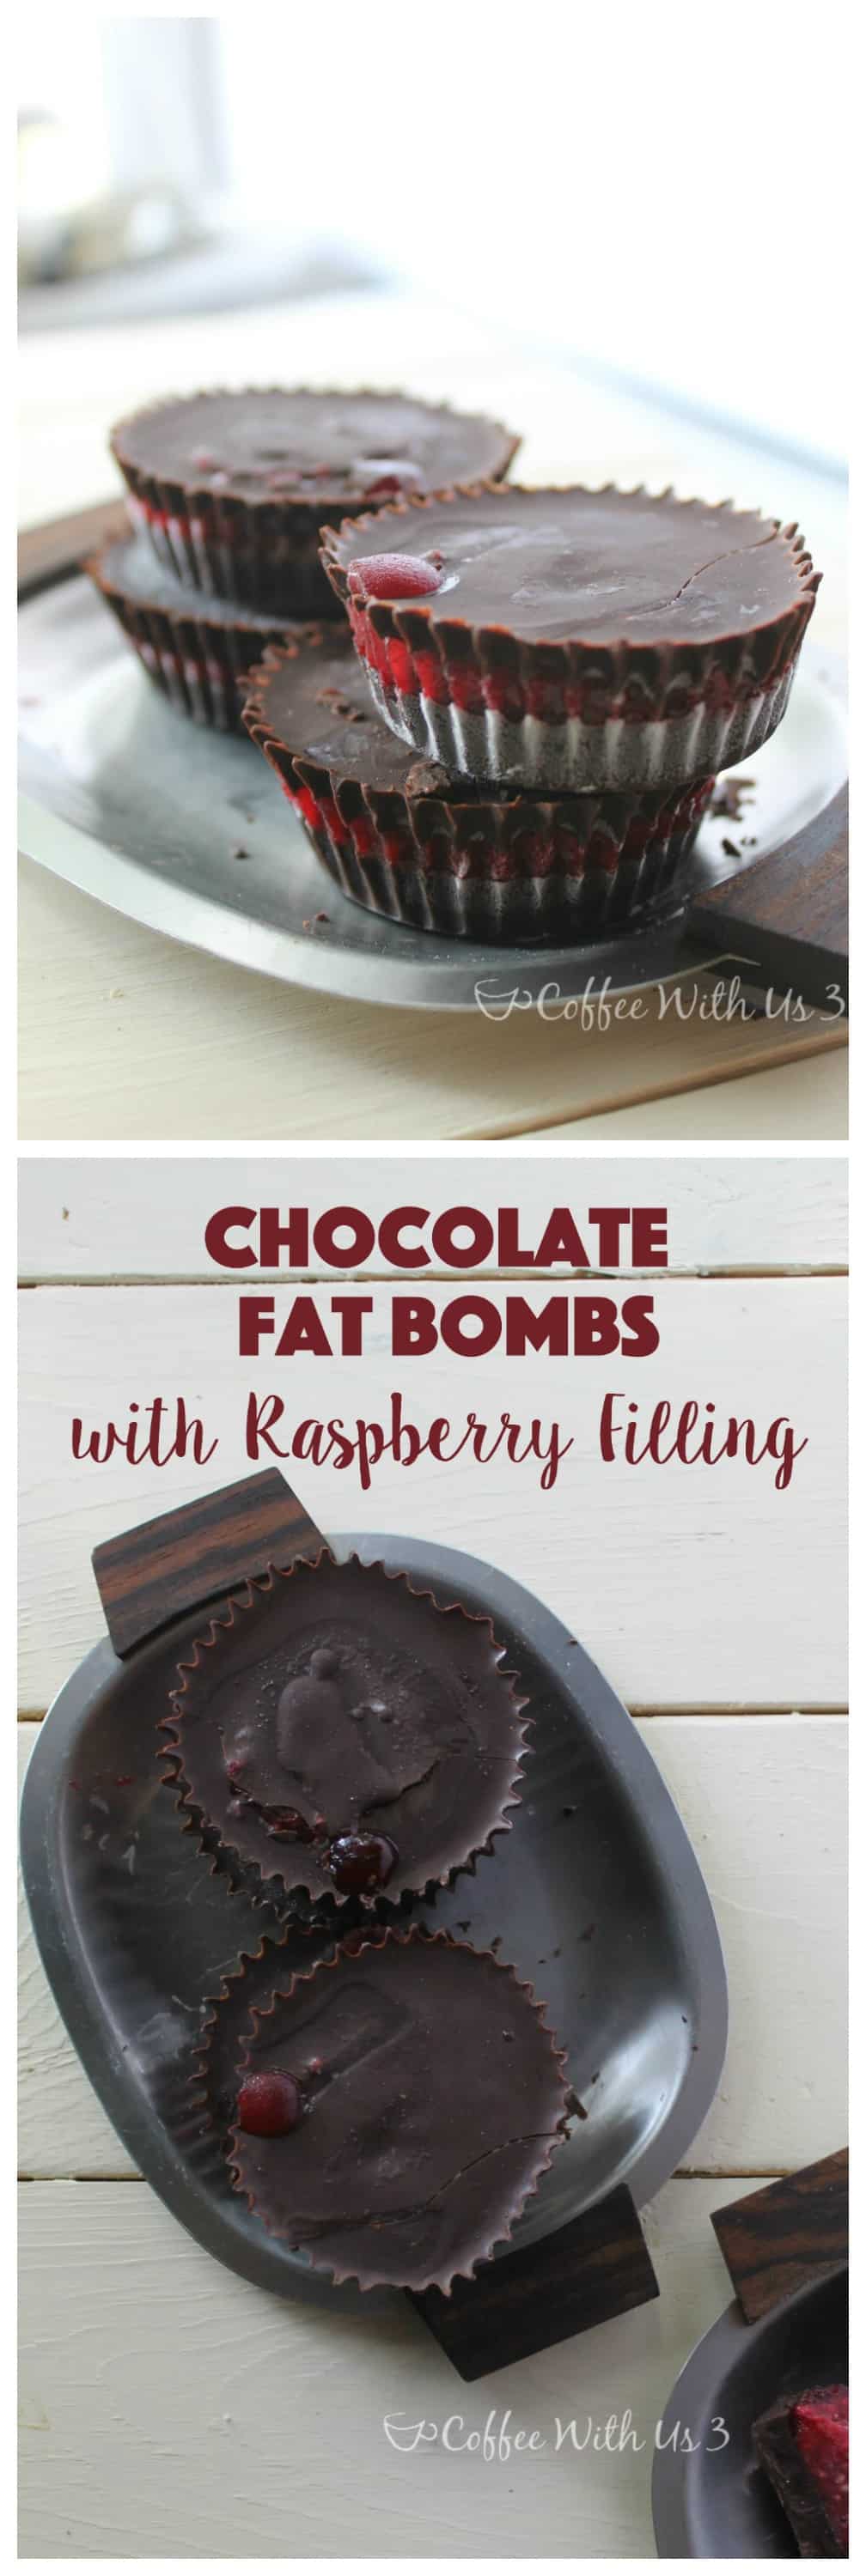 Delicious chocolate fat bombs with a raspberry filling are the perfect snack for people who are on the Keto diet and looking for a sweet source of fat.